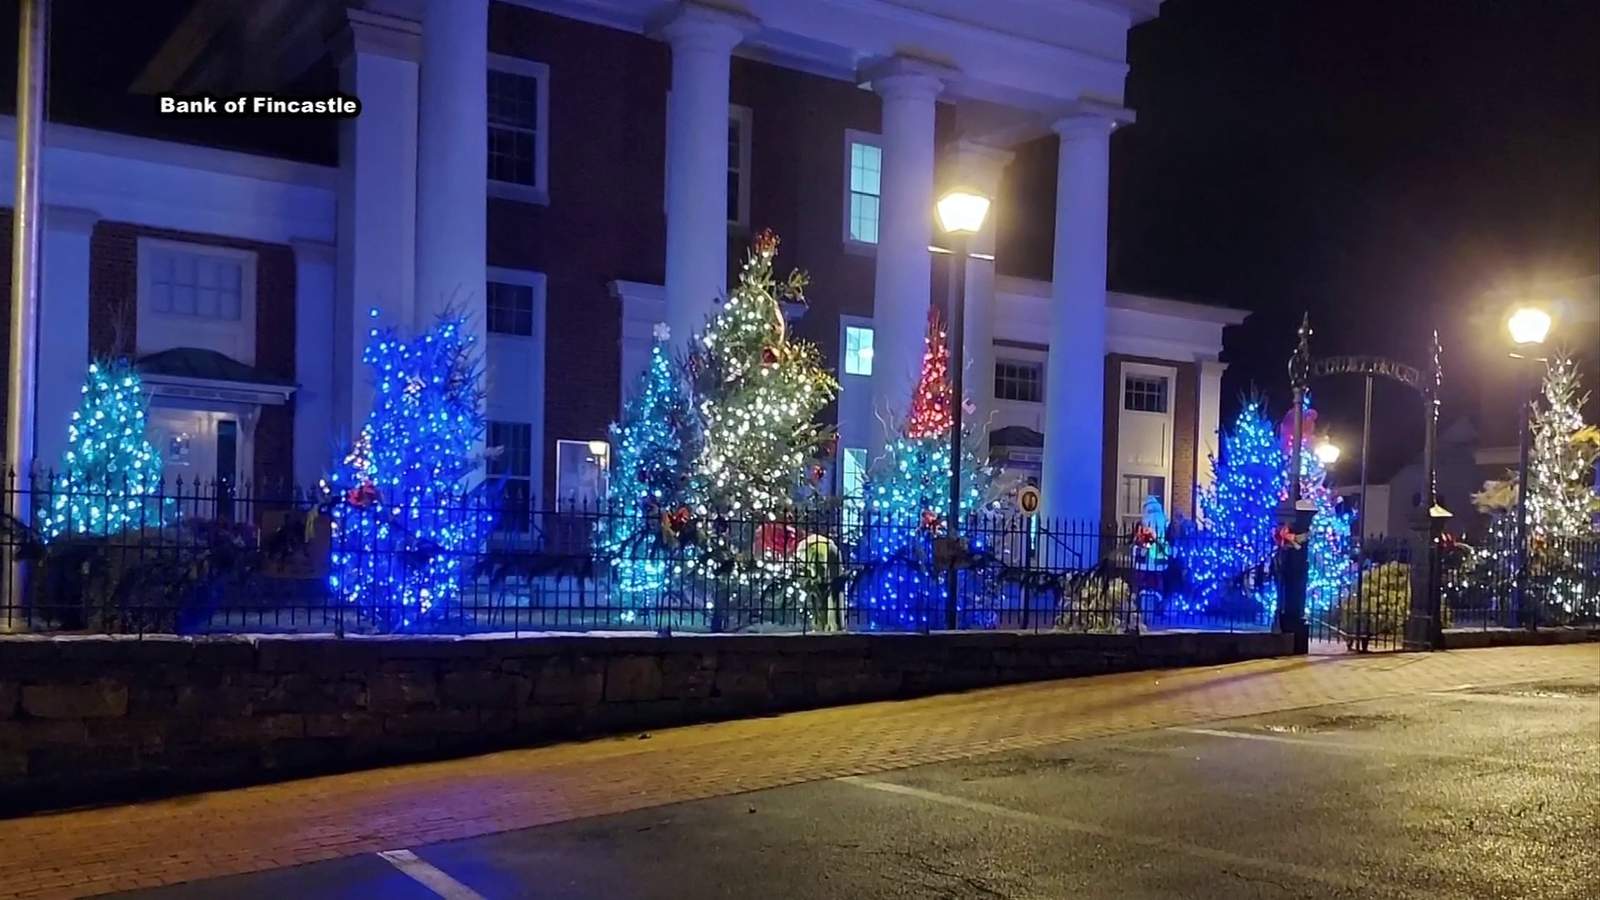 Botetourt Chamber of Commerce creates first Tinsel Trail in Fincastle